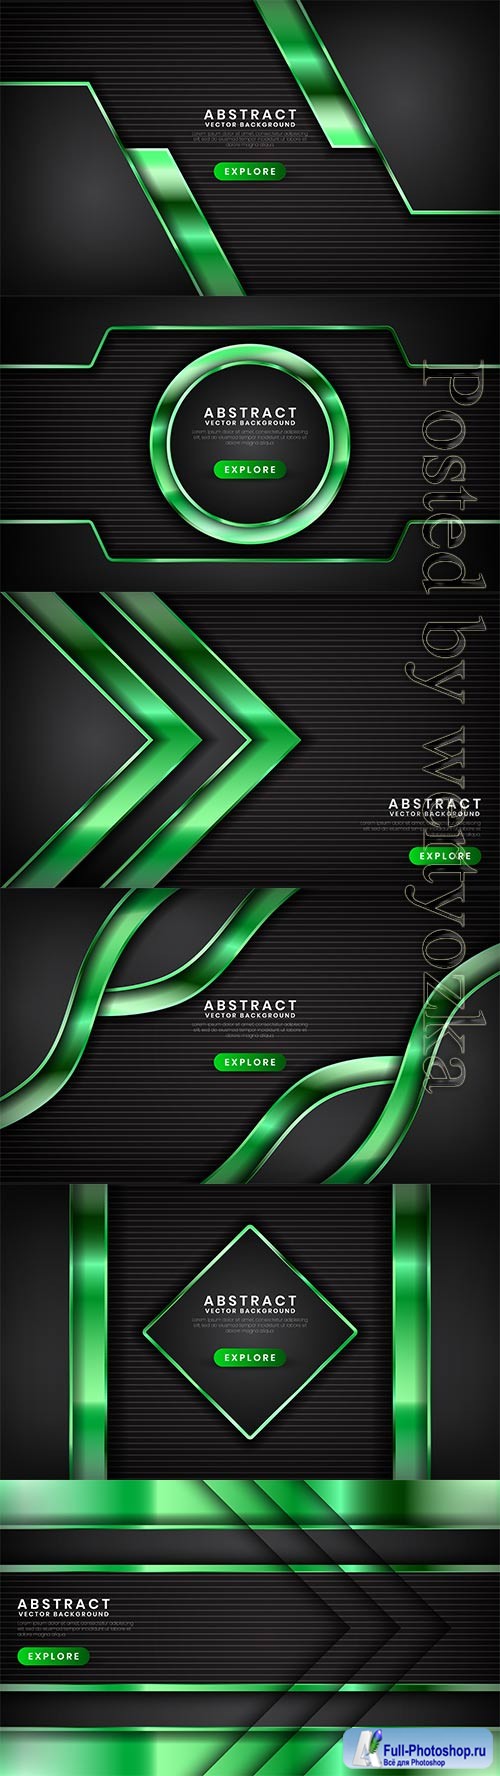 Abstract vector backgrounds with green design